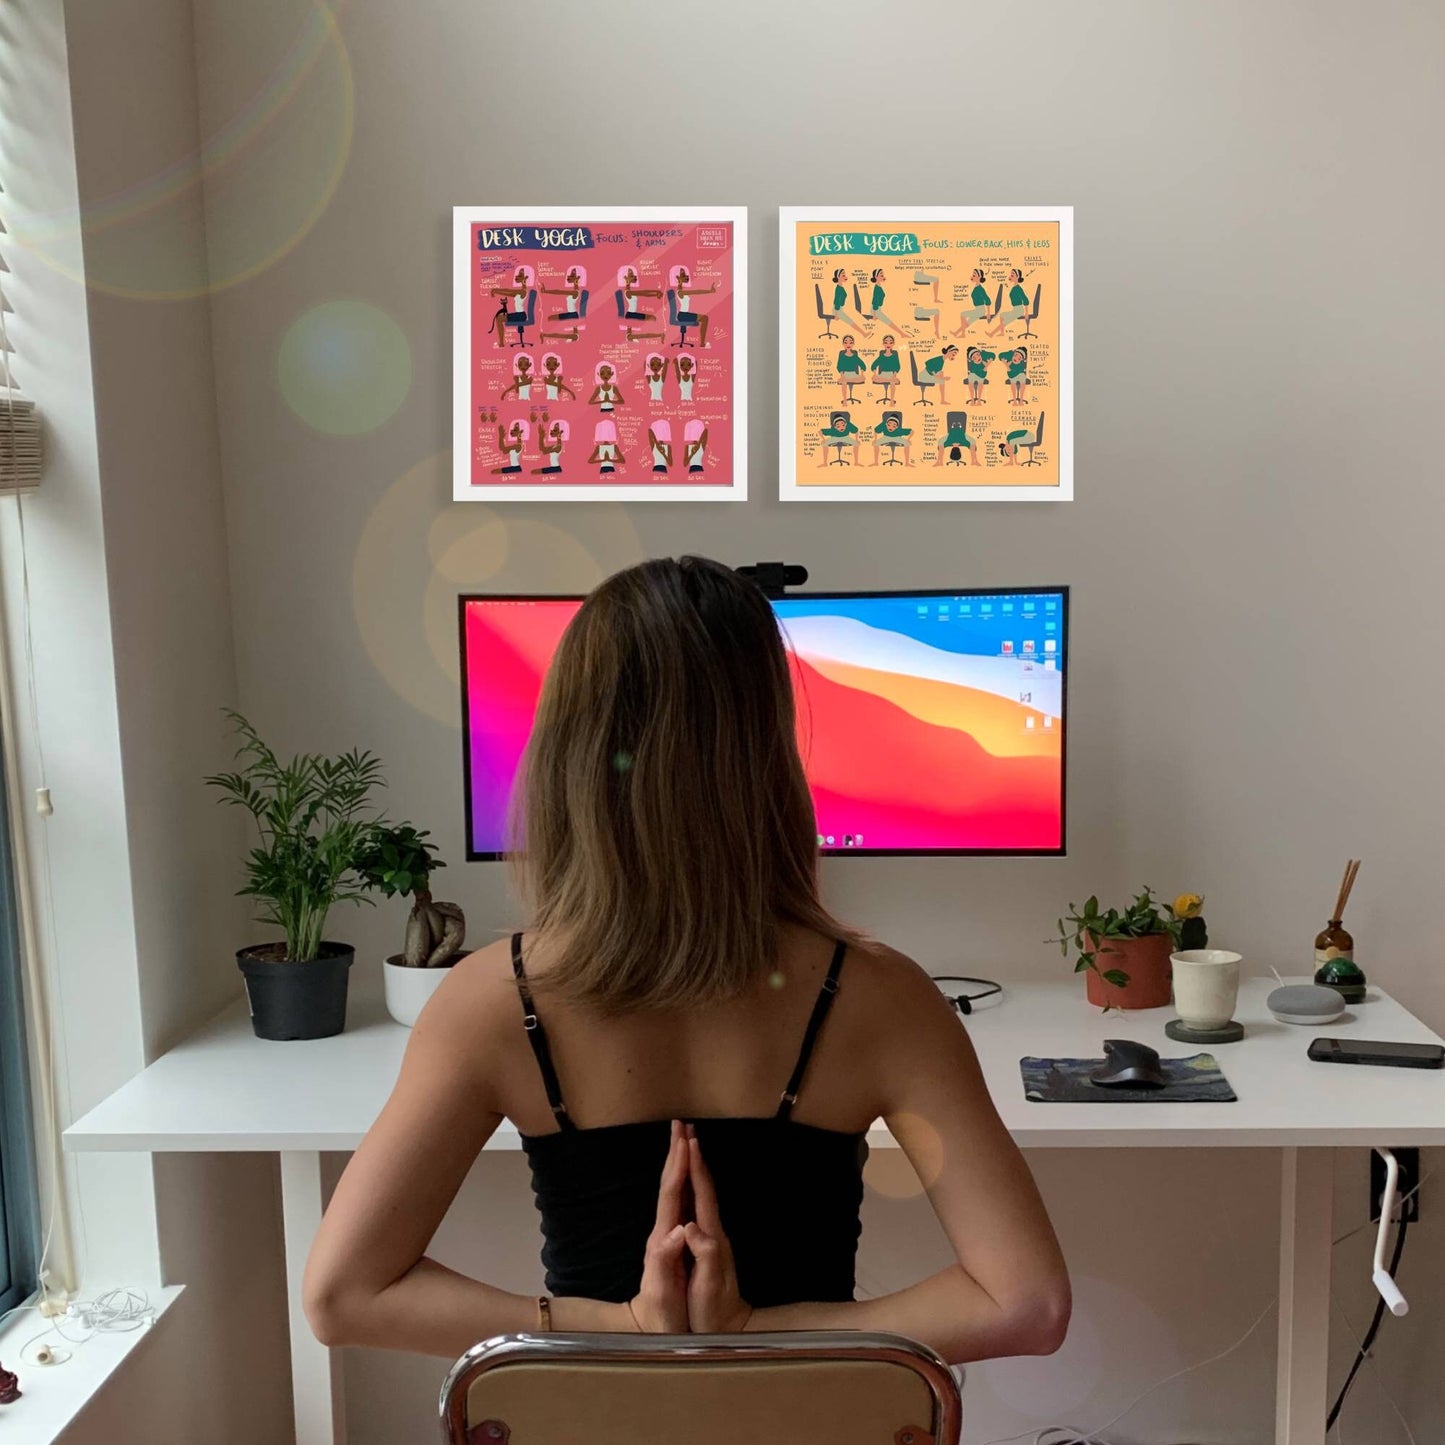 Desk Yoga - focus on lower body, lower back, and hips | Yoga At Your Desk | Office Yoga | Yoga Print | Yoga Art | 8x8 in, 8x10 in, 16x16 in